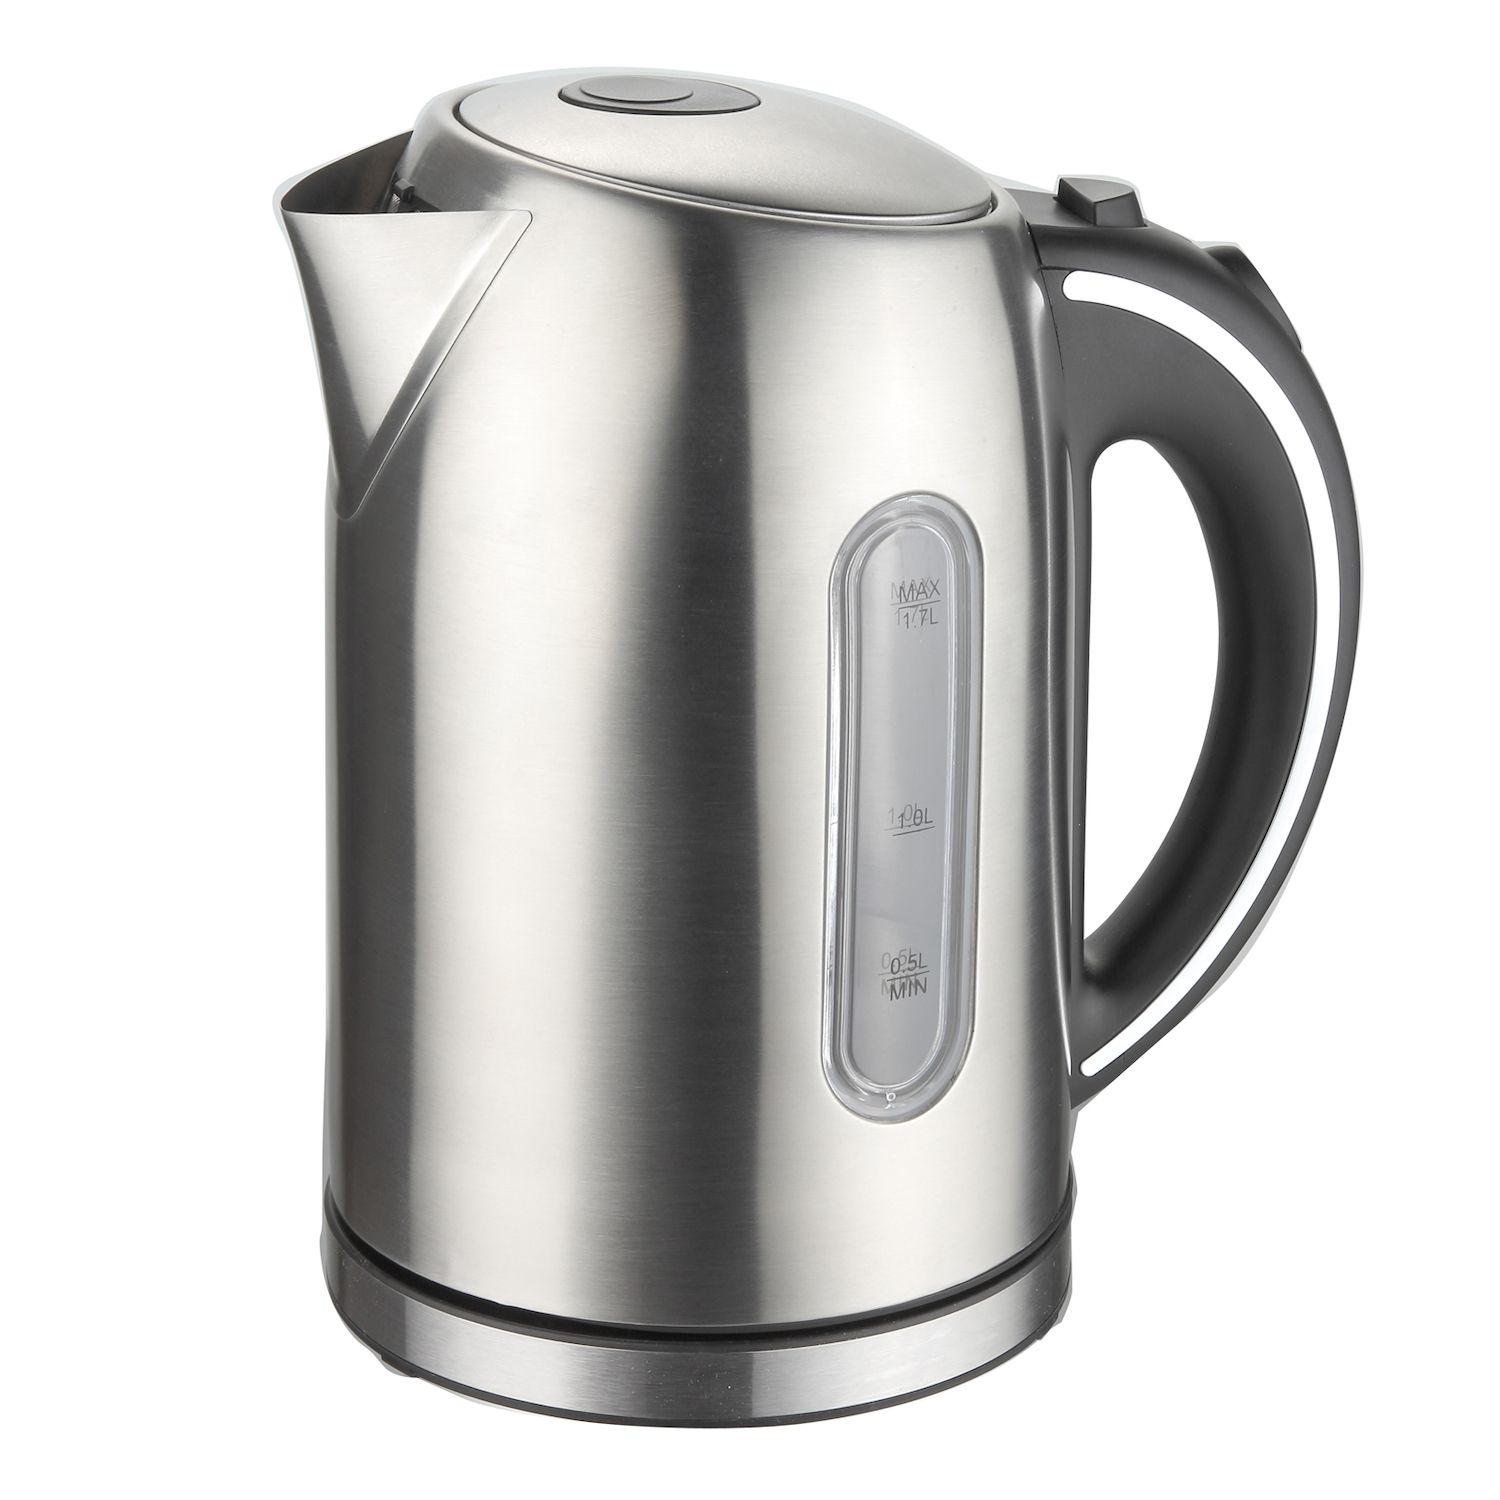 1.2 L Stainless Steel Electric Cordless Tea Kettle, Small Appliances:  Maxi-Aids, Inc.